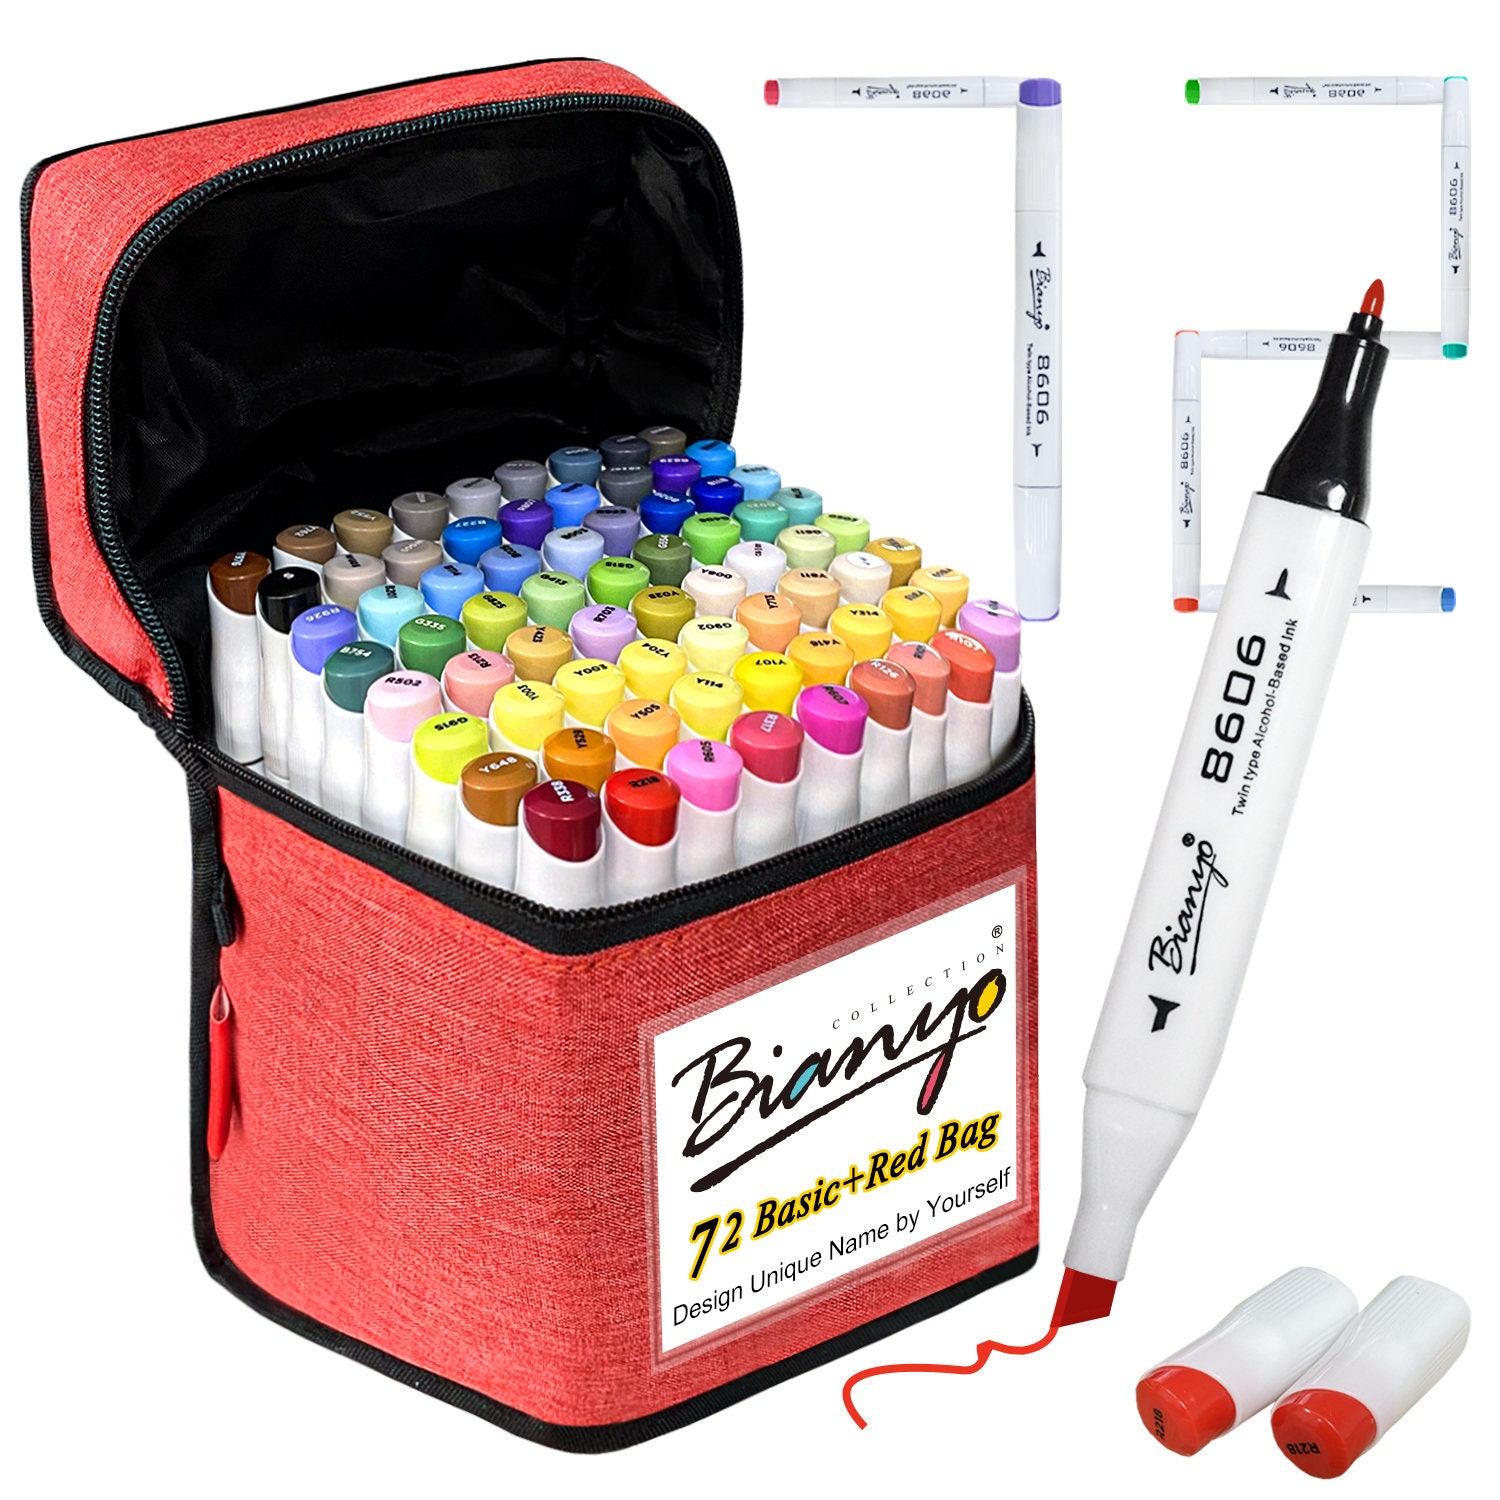 Copic Marker Insert Only for Black Bag - Holds 276 Markers